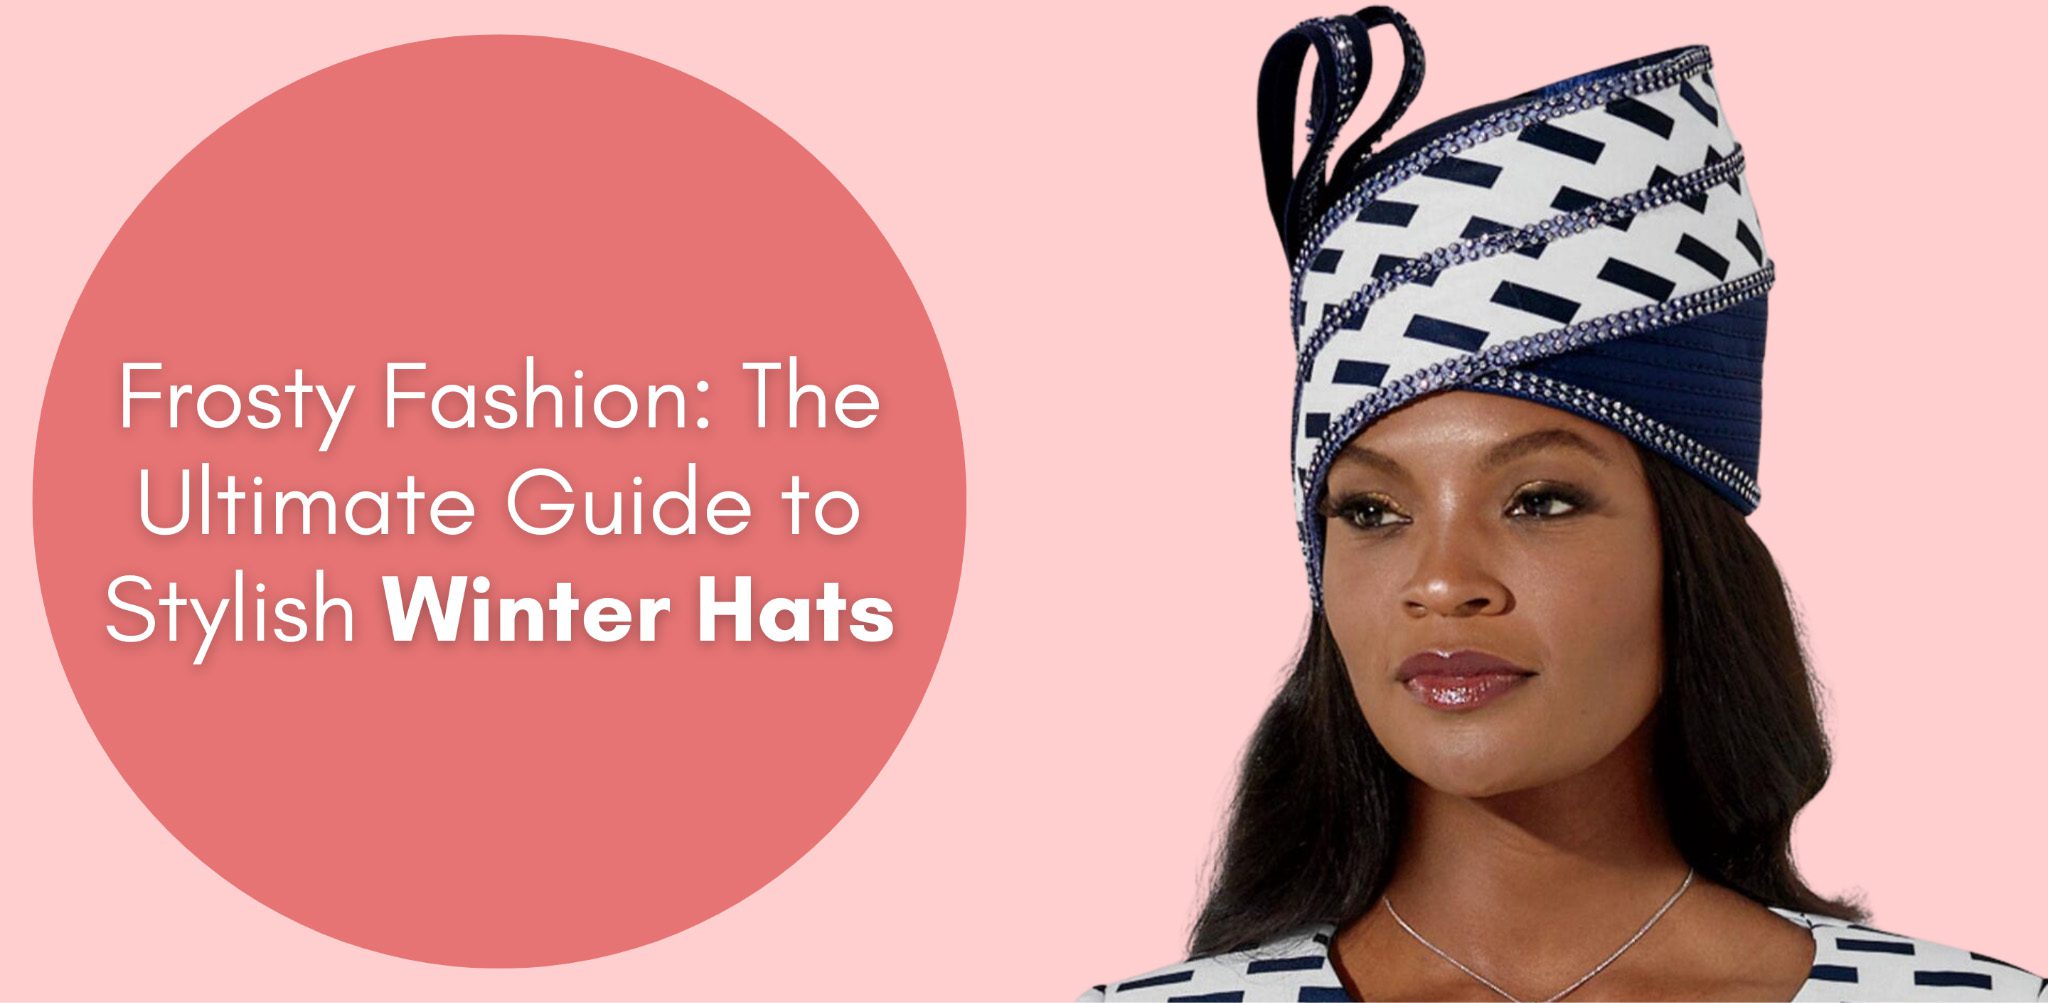 Frosty Fashion: The Ultimate Guide to Stylish Winter Hats